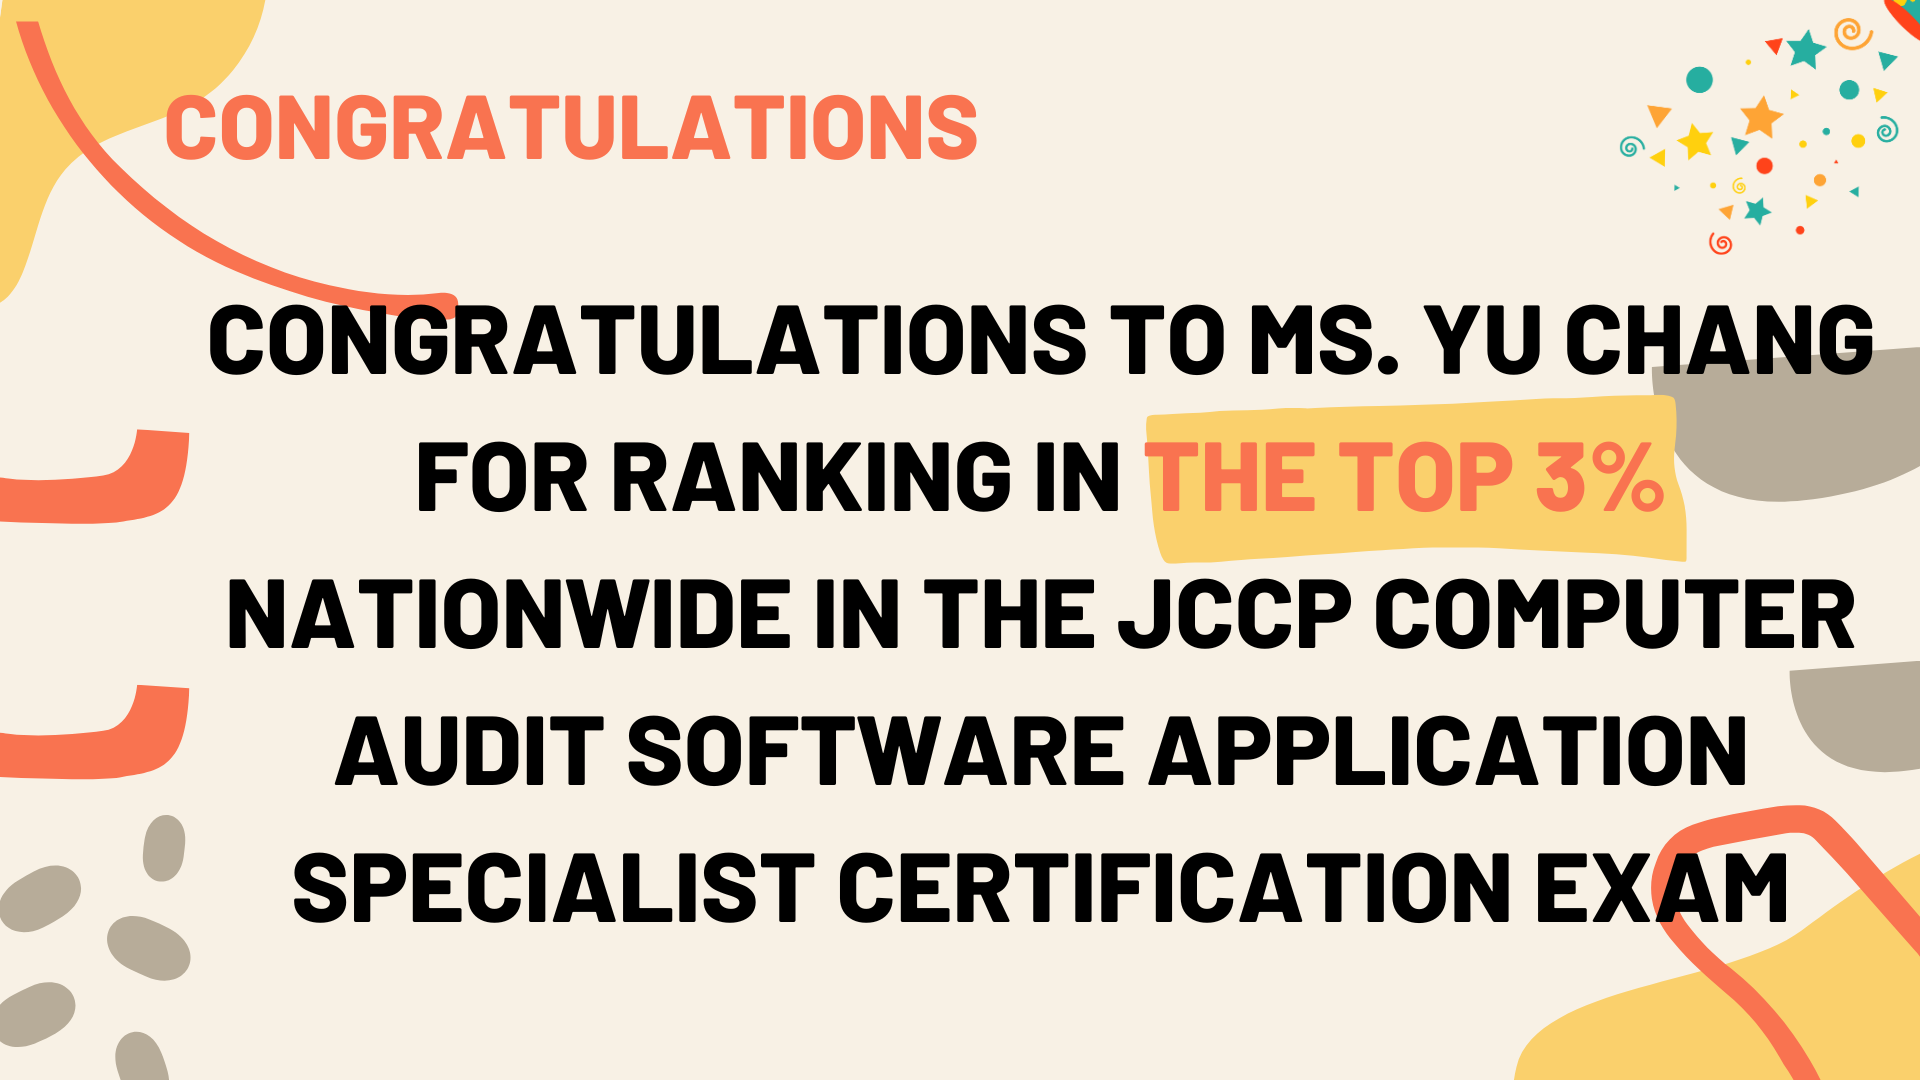 Featured image for “Congratulations to Ms. Yu Chang for Ranking in the Top 3% Nationwide in the JCCP Computer Audit Software Application Specialist Certification Exam”